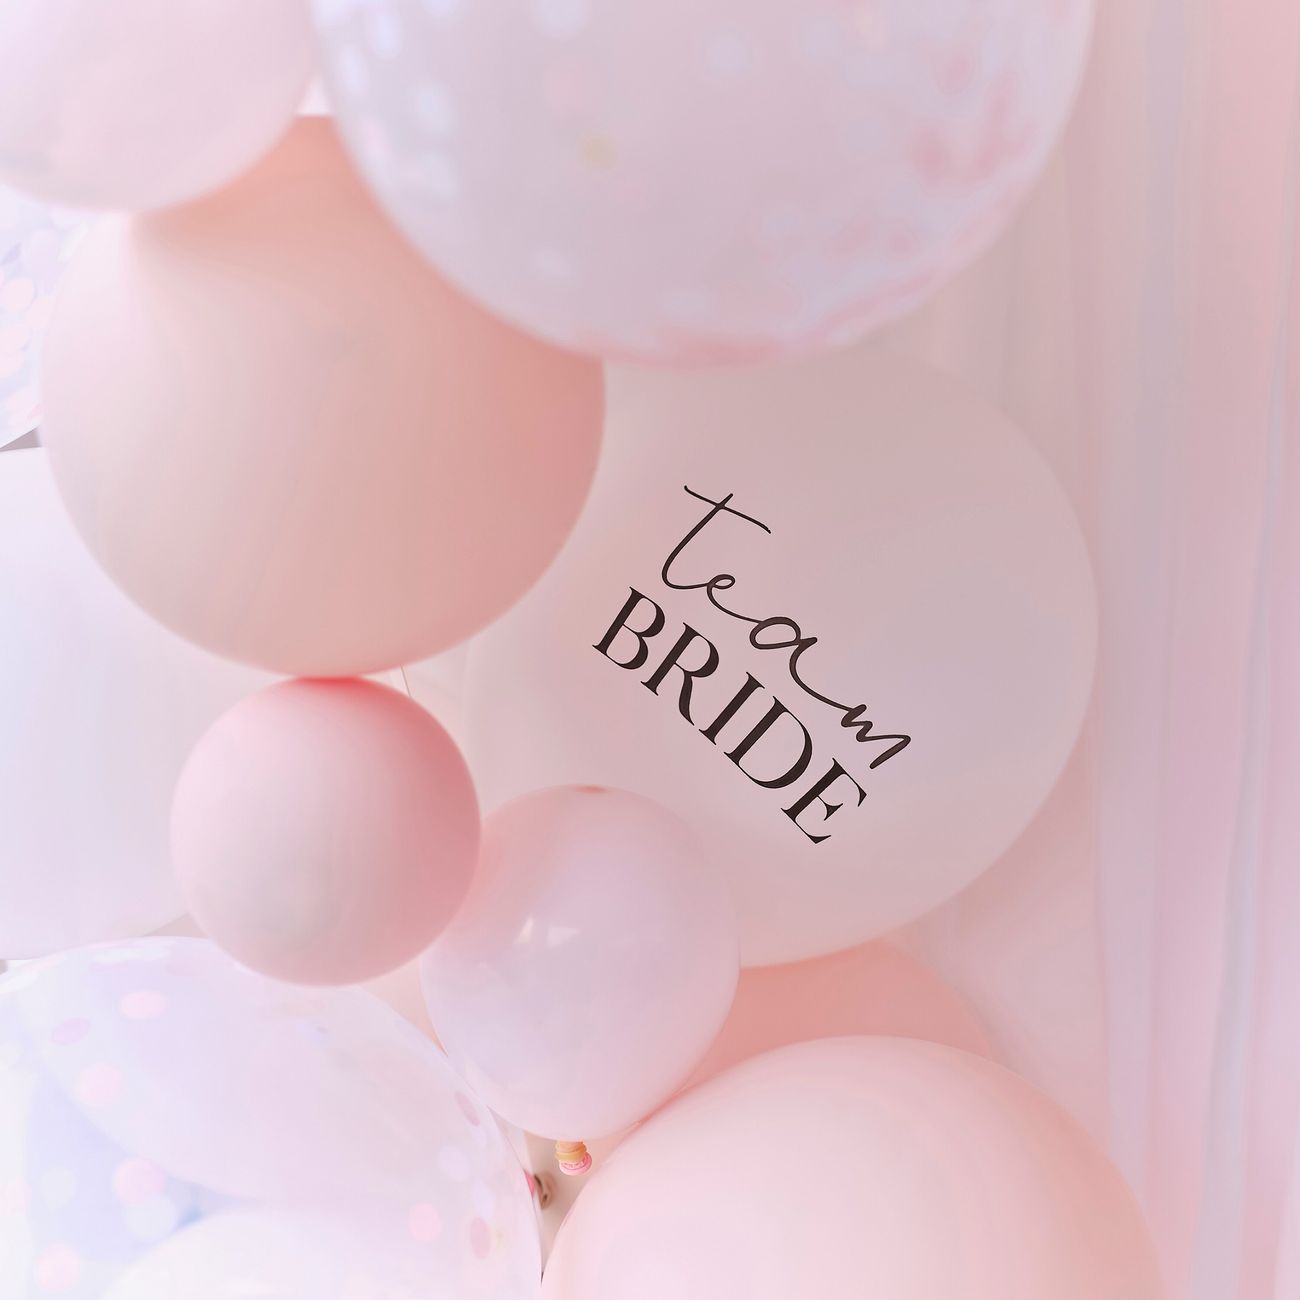 ballongbage-bride-to-be-100212-3